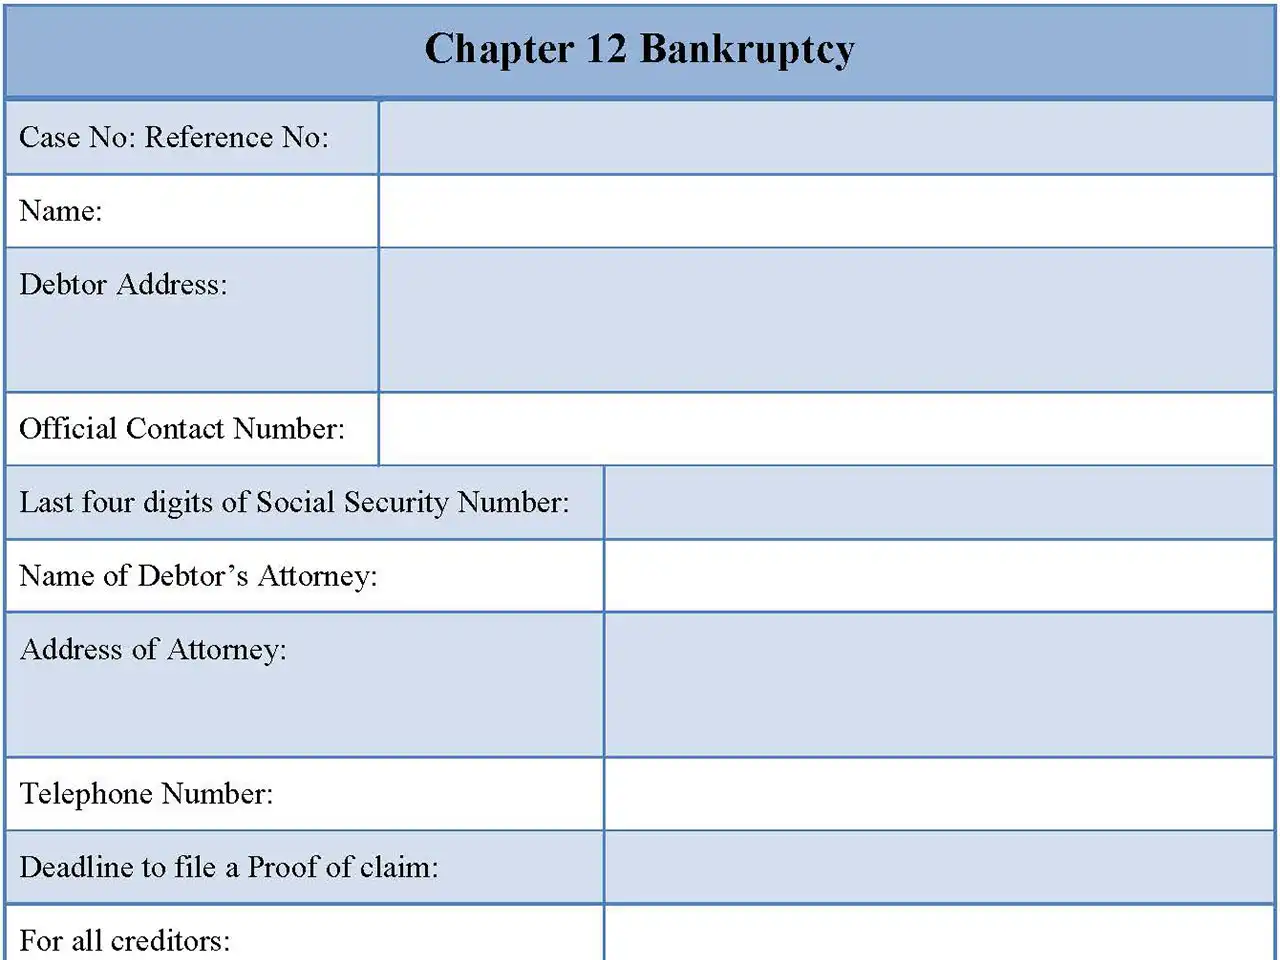 Chapter 12 Bankruptcy Form